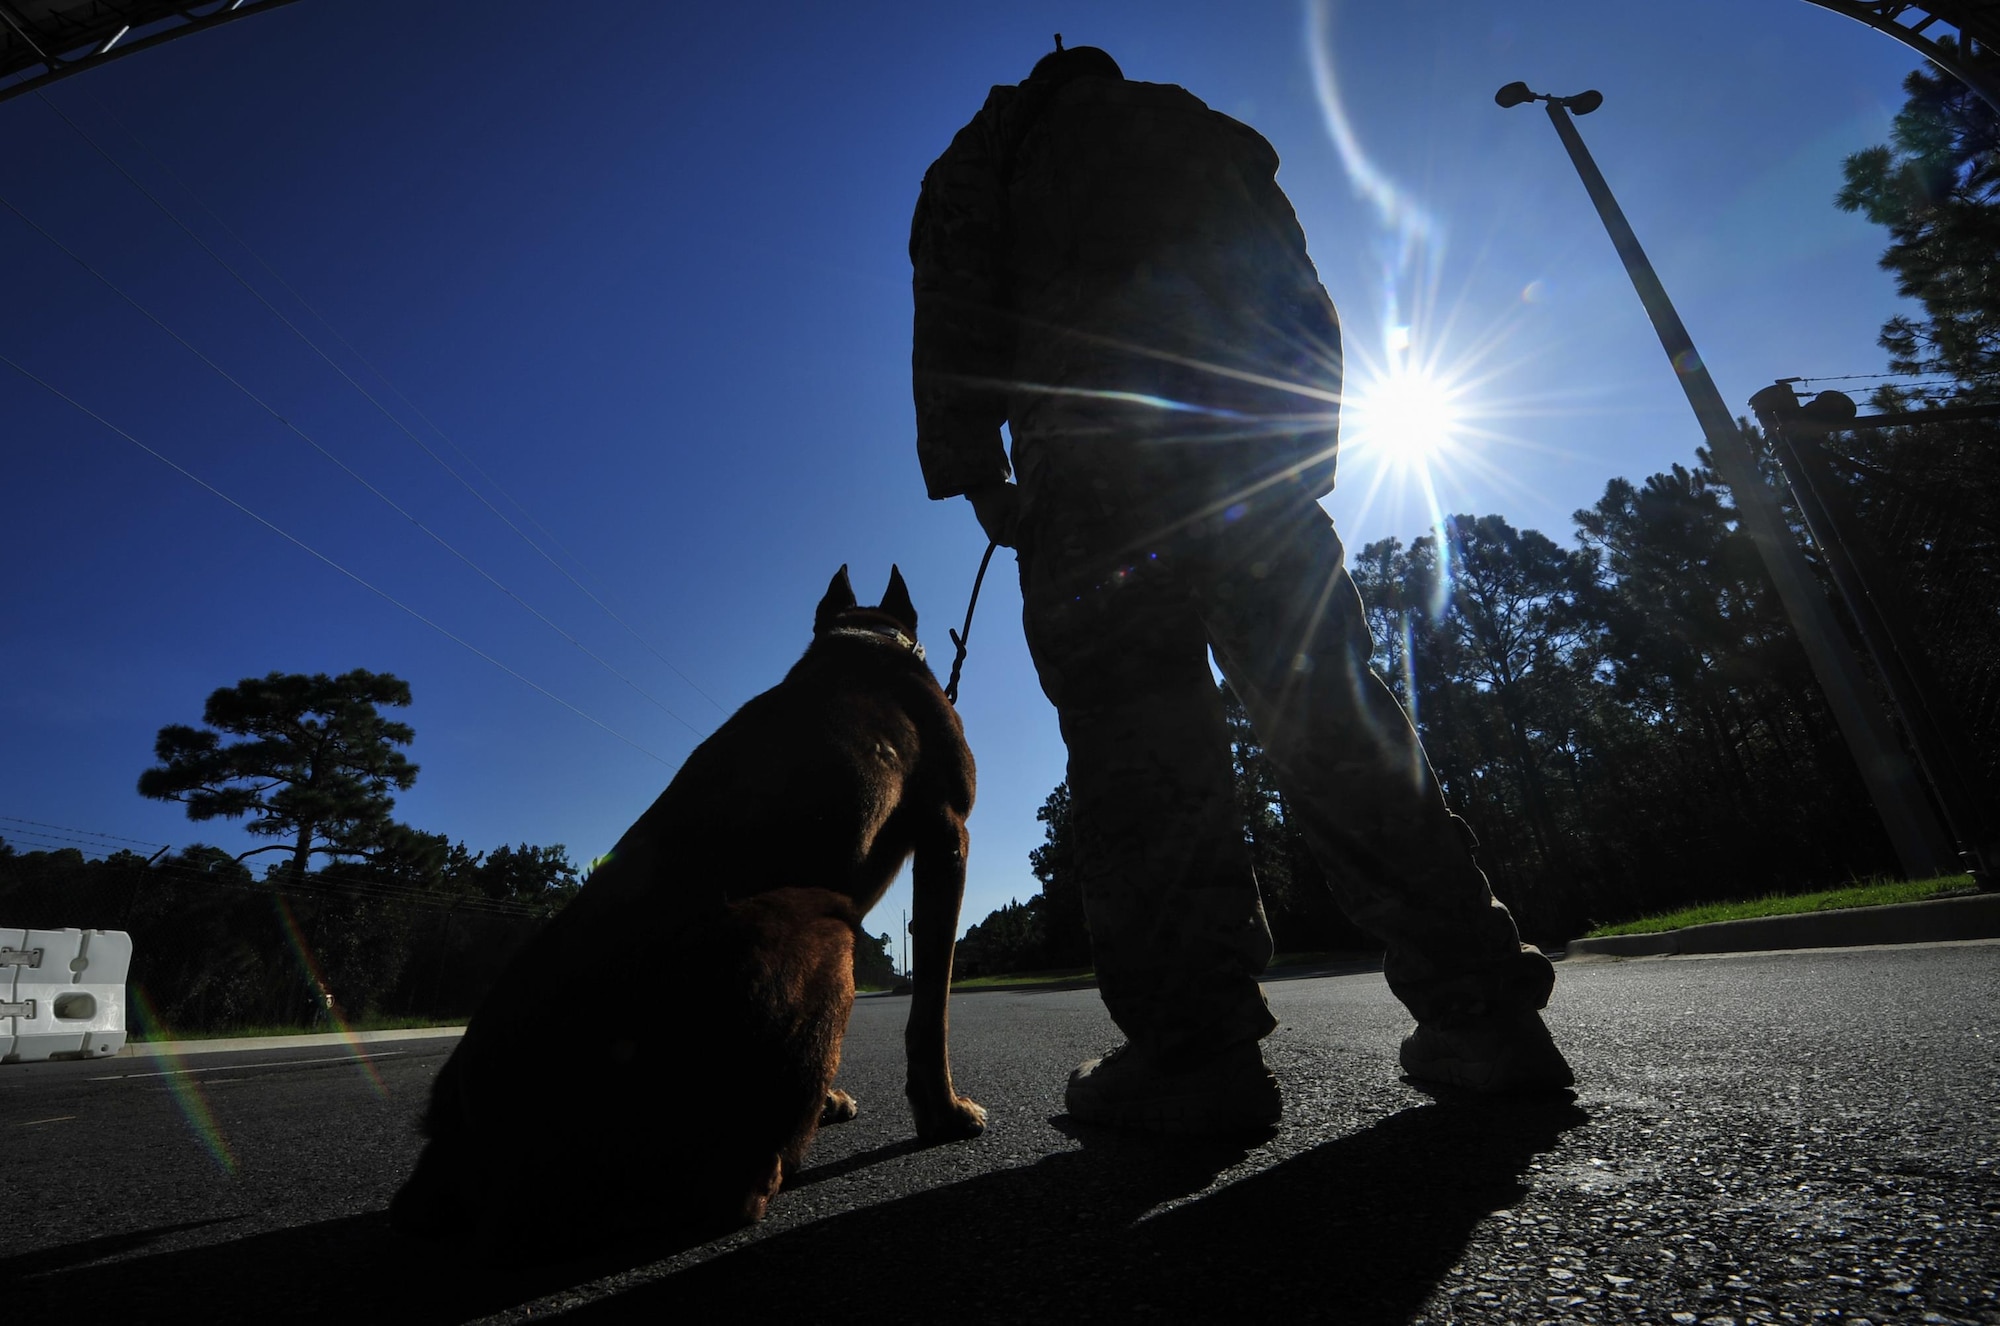 Ziko, a military working dog with the 1st Special Operations Security Forces Squadron, sits alongside Staff Sgt. George Garcia, a military working dog handler with the 1st SOSFS, at Hurlburt Field, Fla., Aug. 22, 2016. Handlers and dogs are responsible for providing the base with narcotic and explosive detection as well as patrol work. (U.S. Air Force photo by Airman 1st Class Joseph Pick)